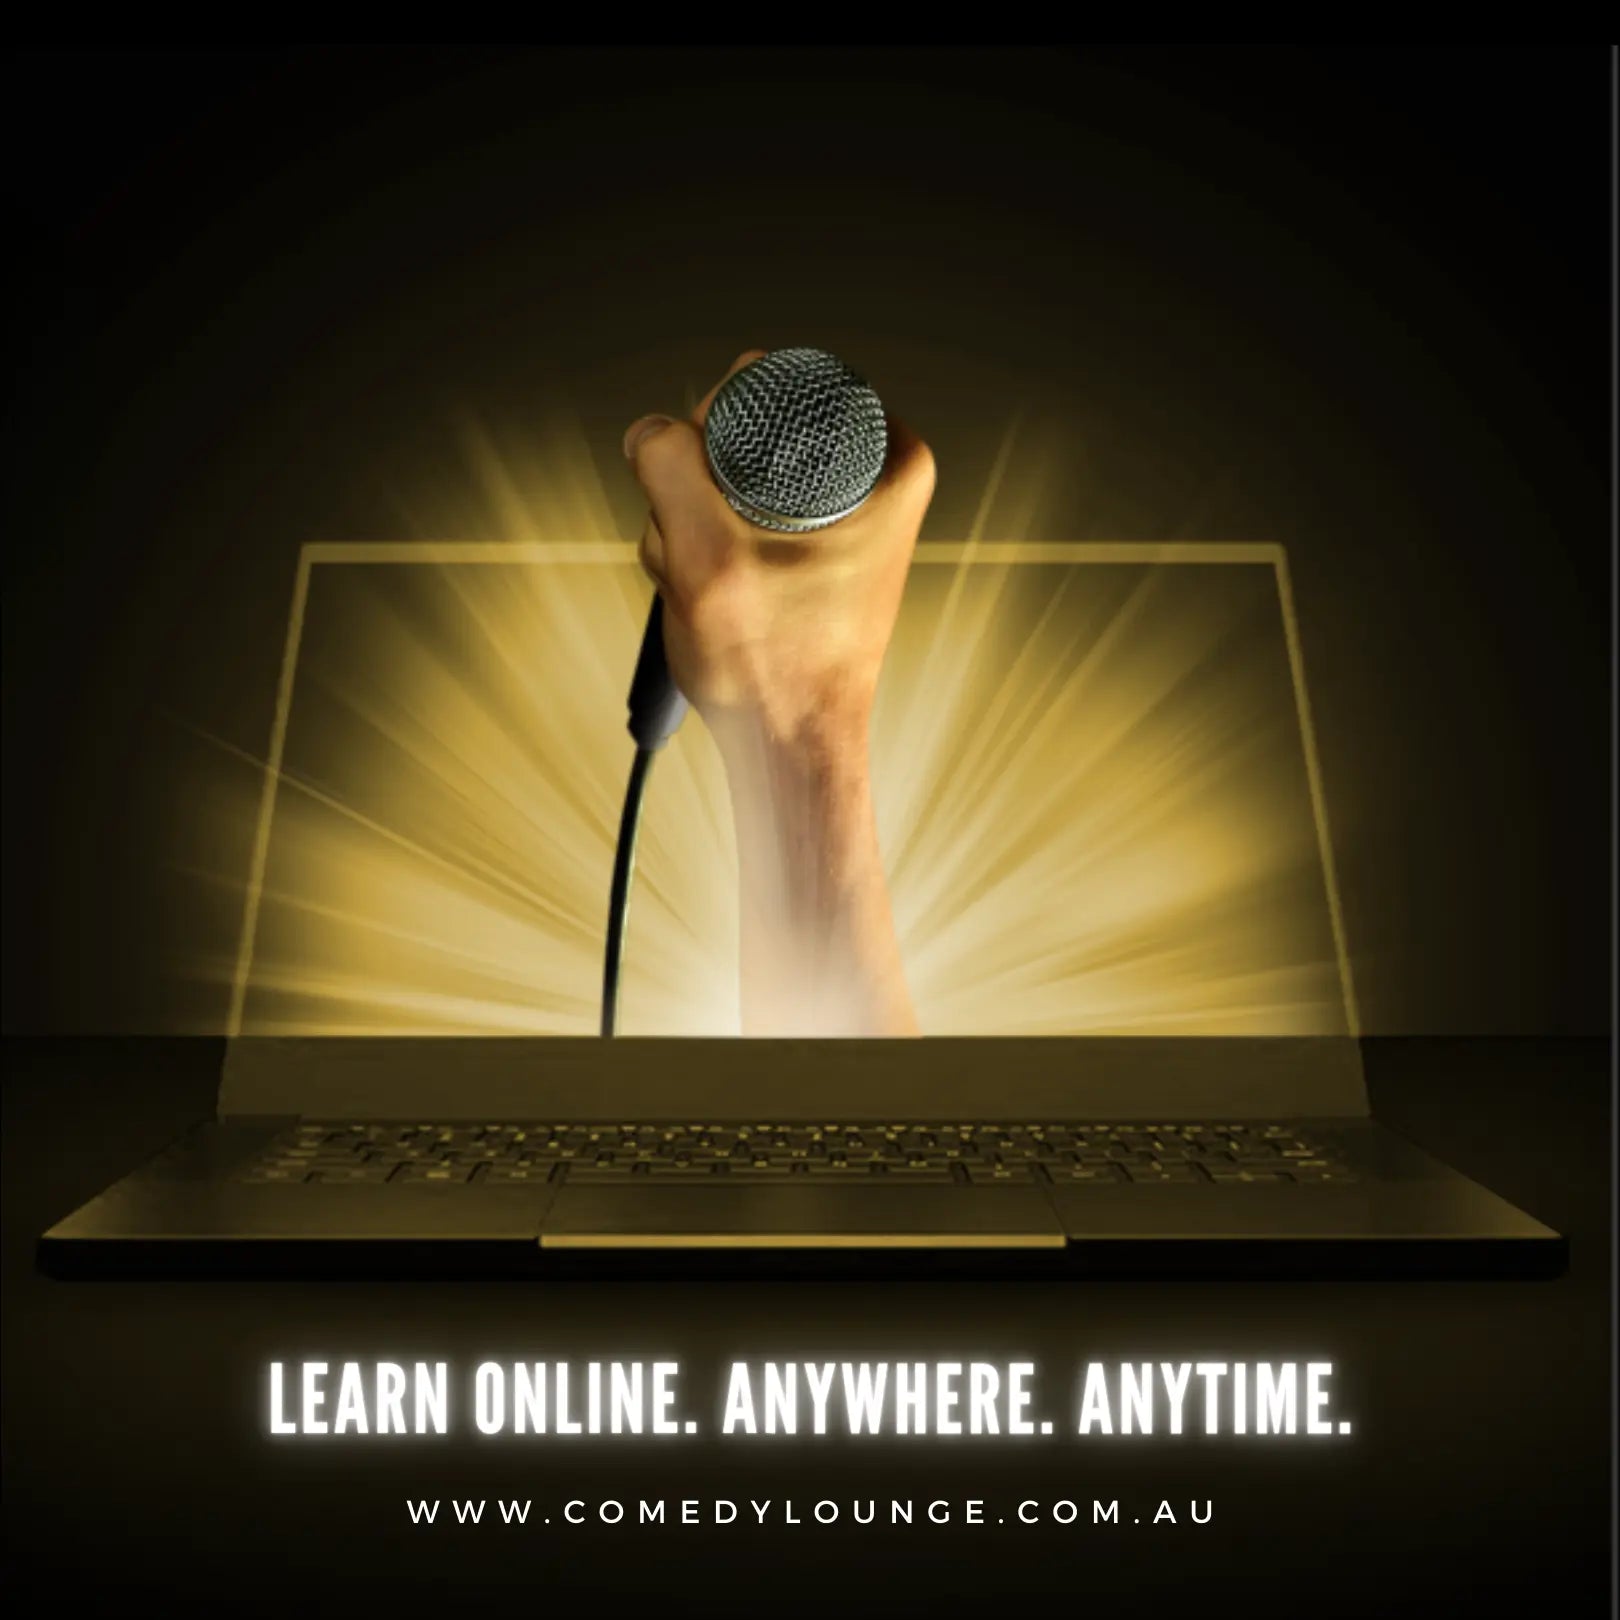 Laptop screen displaying a comedian's hand holding a microphone, emerging from the screen. Text overlay reads 'Learn Online. Anywhere. Anytime' with the website 'www.comedylounge.com.au' below.